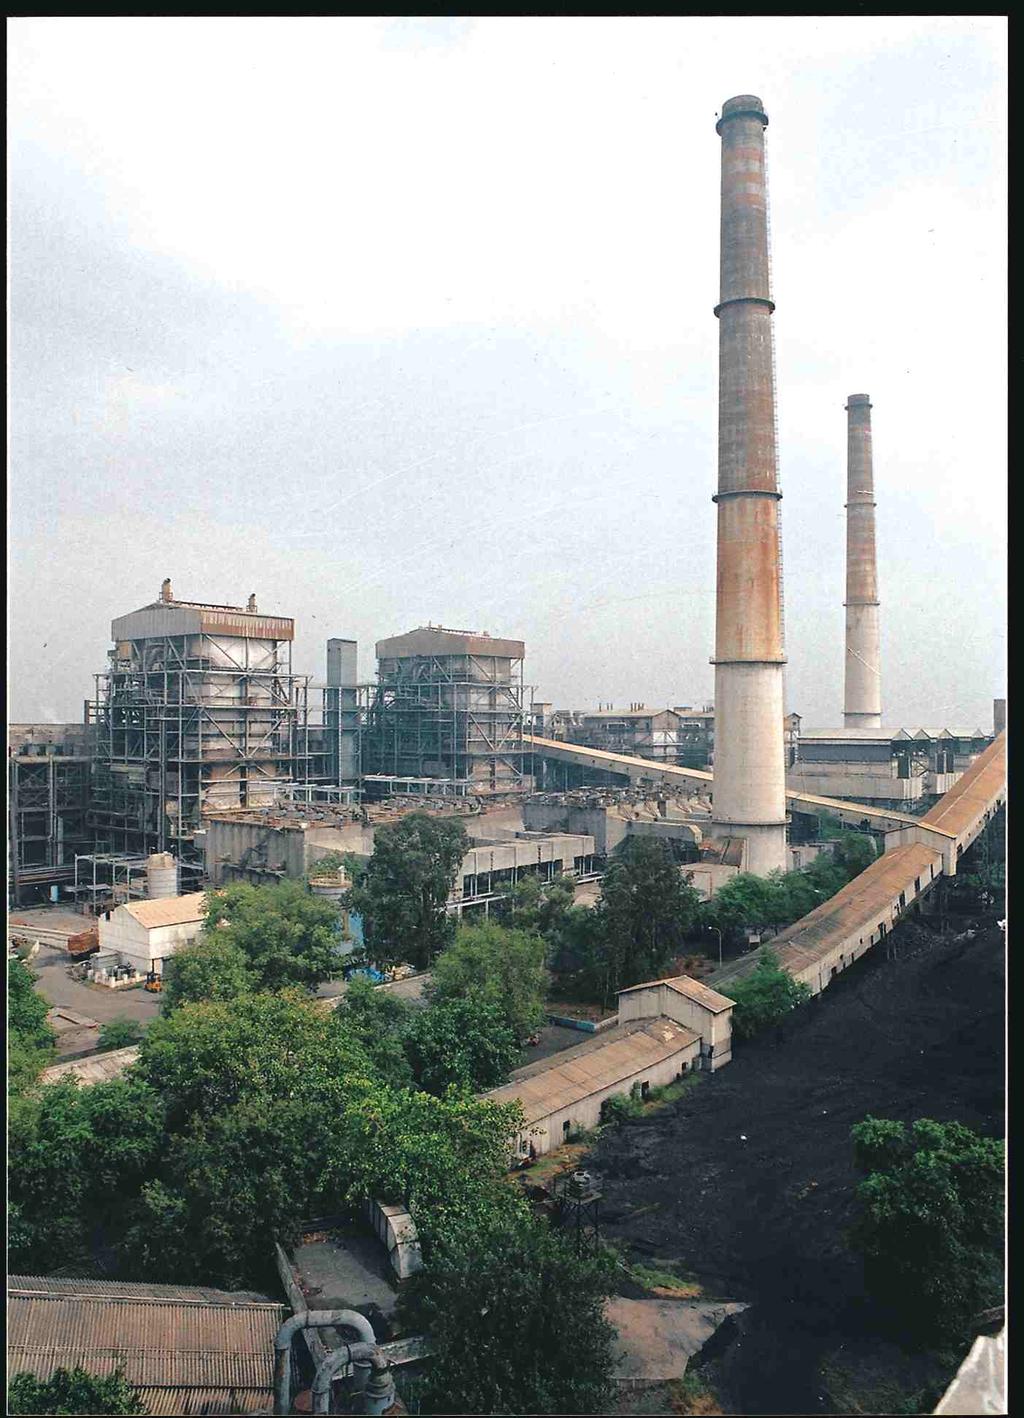 Chapter-19 BADARPUR THERMAL POWER STATION Badarpur Thermal Power Station (BTPS) was established by e Government of India in e year 1967 to ensure power availability for meeting growing demand of